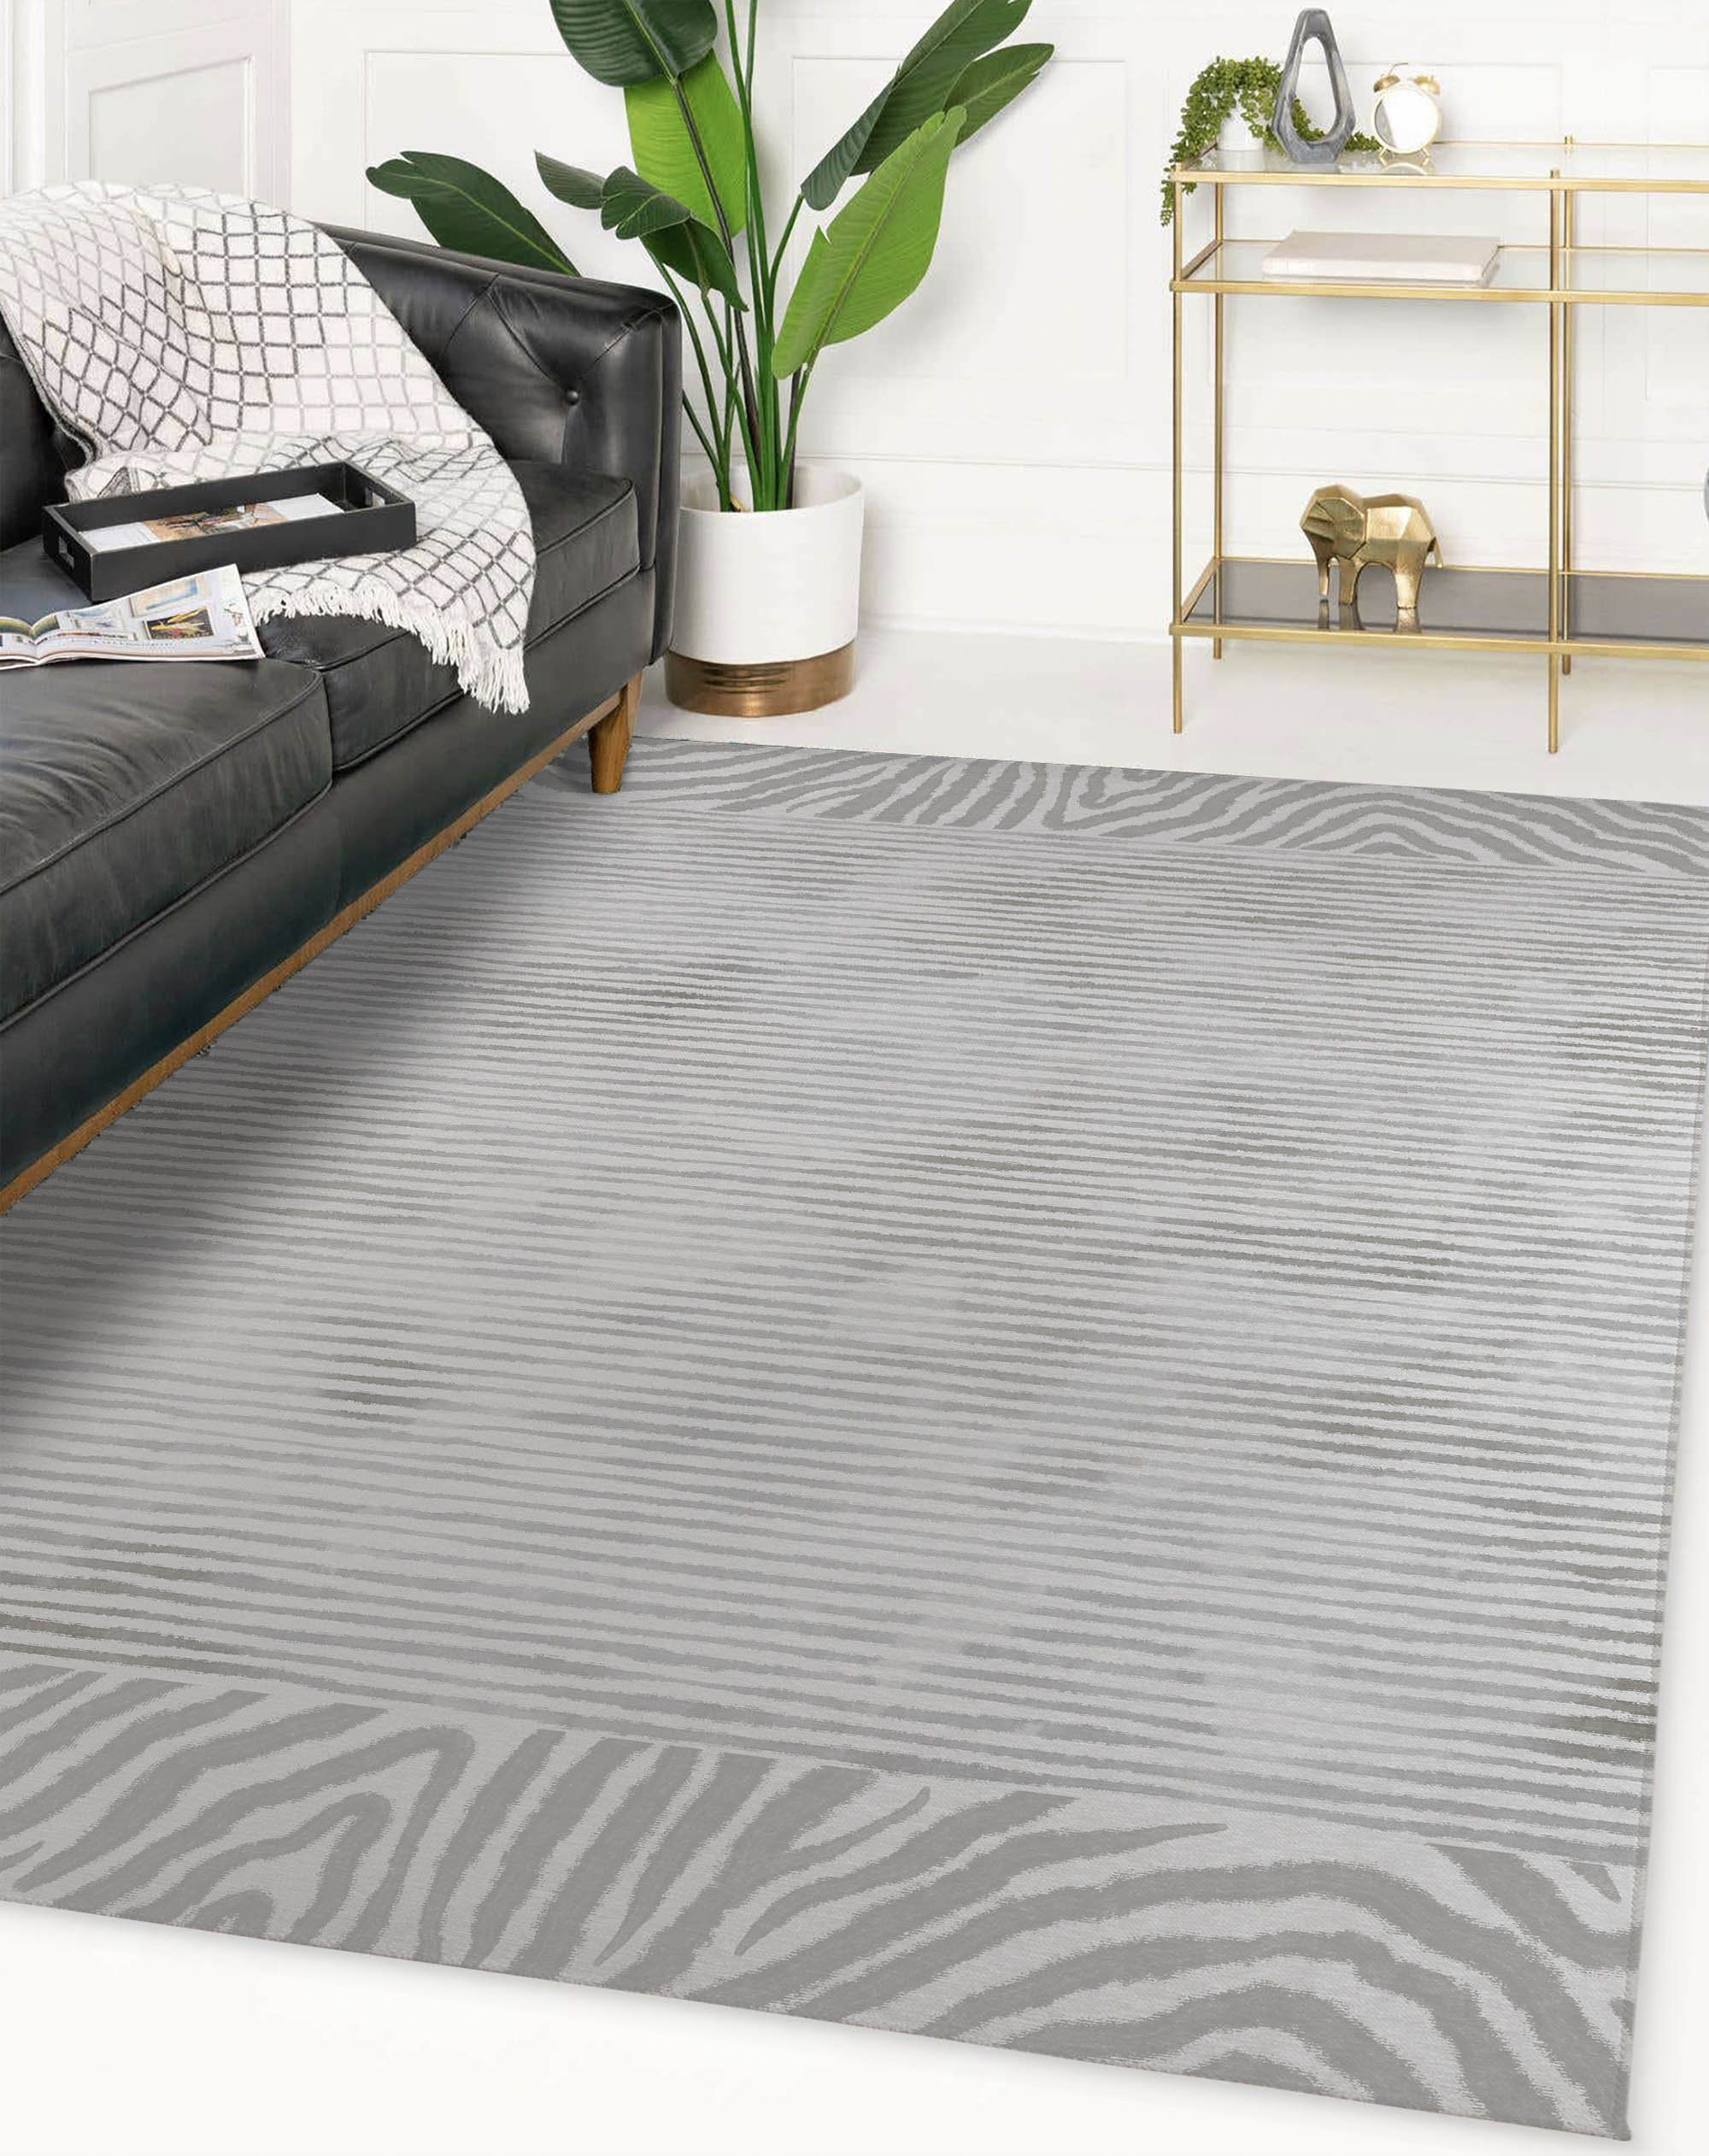 Heavy Duty Tufted Indoor / Outdoor Runner Rug with Different Size Option Latitude Run Rug Size: Rectangle 3' x 5